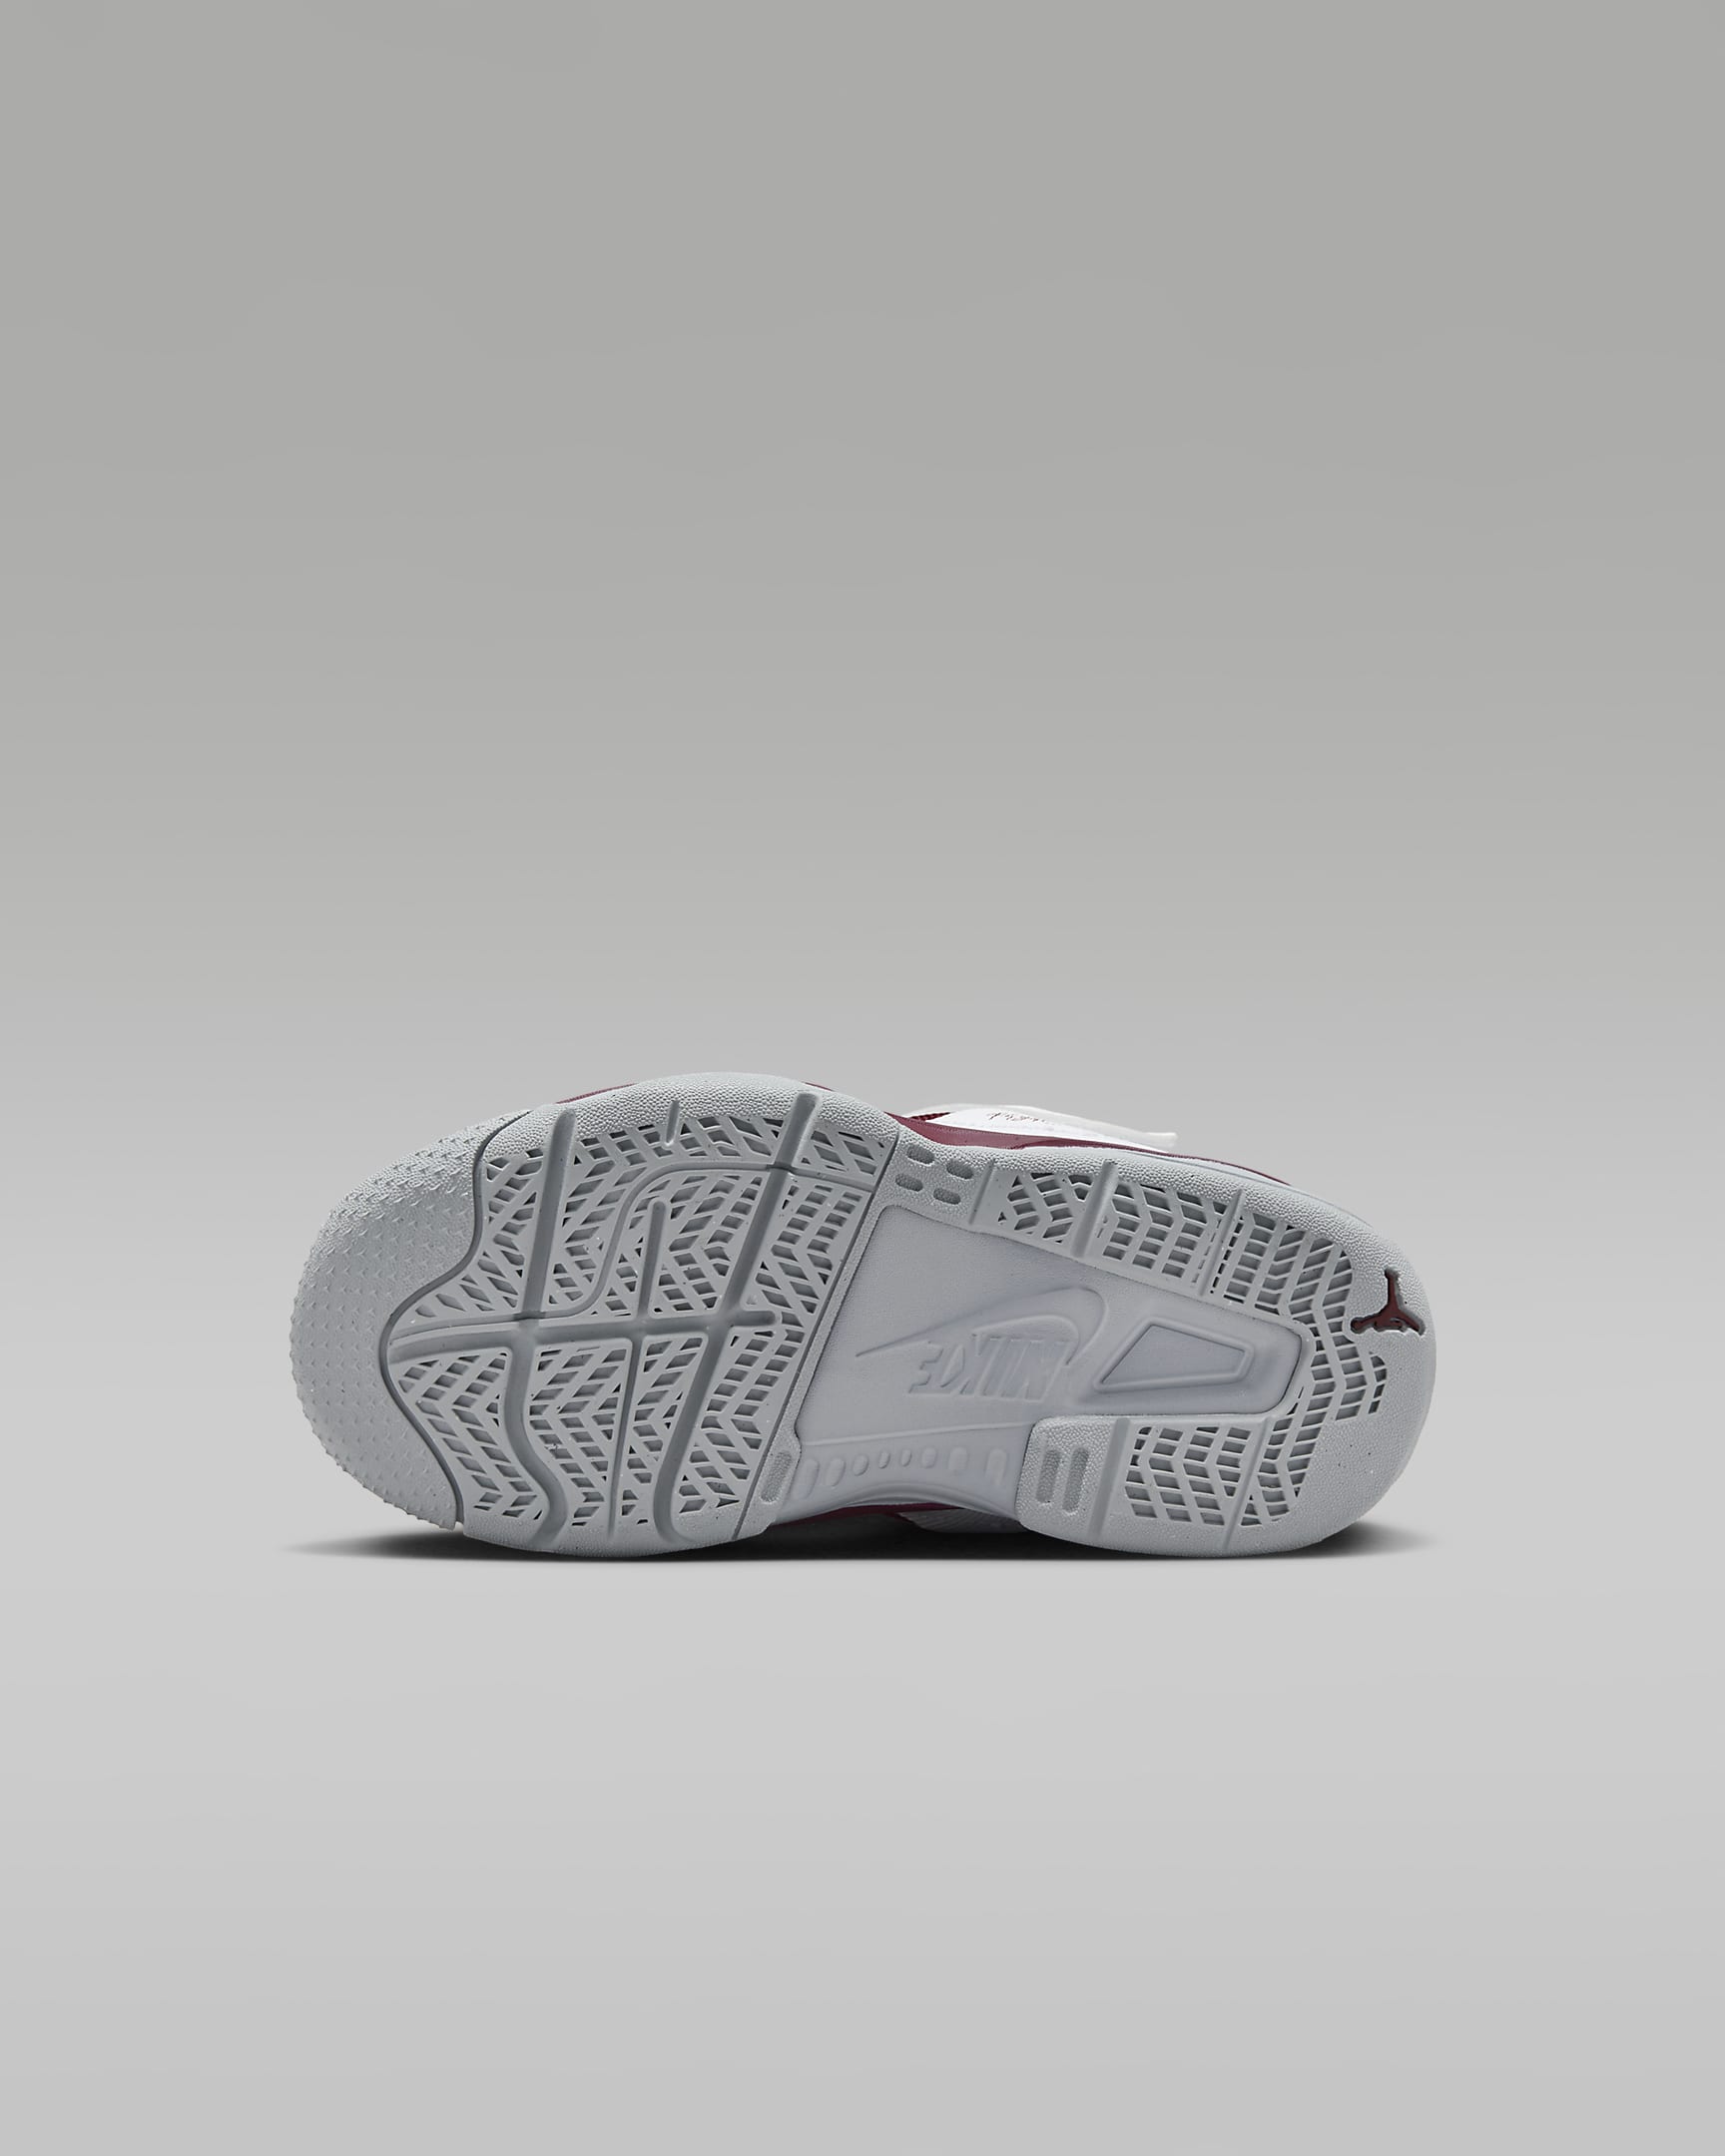 Stay Loyal 3 Younger Kids' Shoes - White/Wolf Grey/Team Red